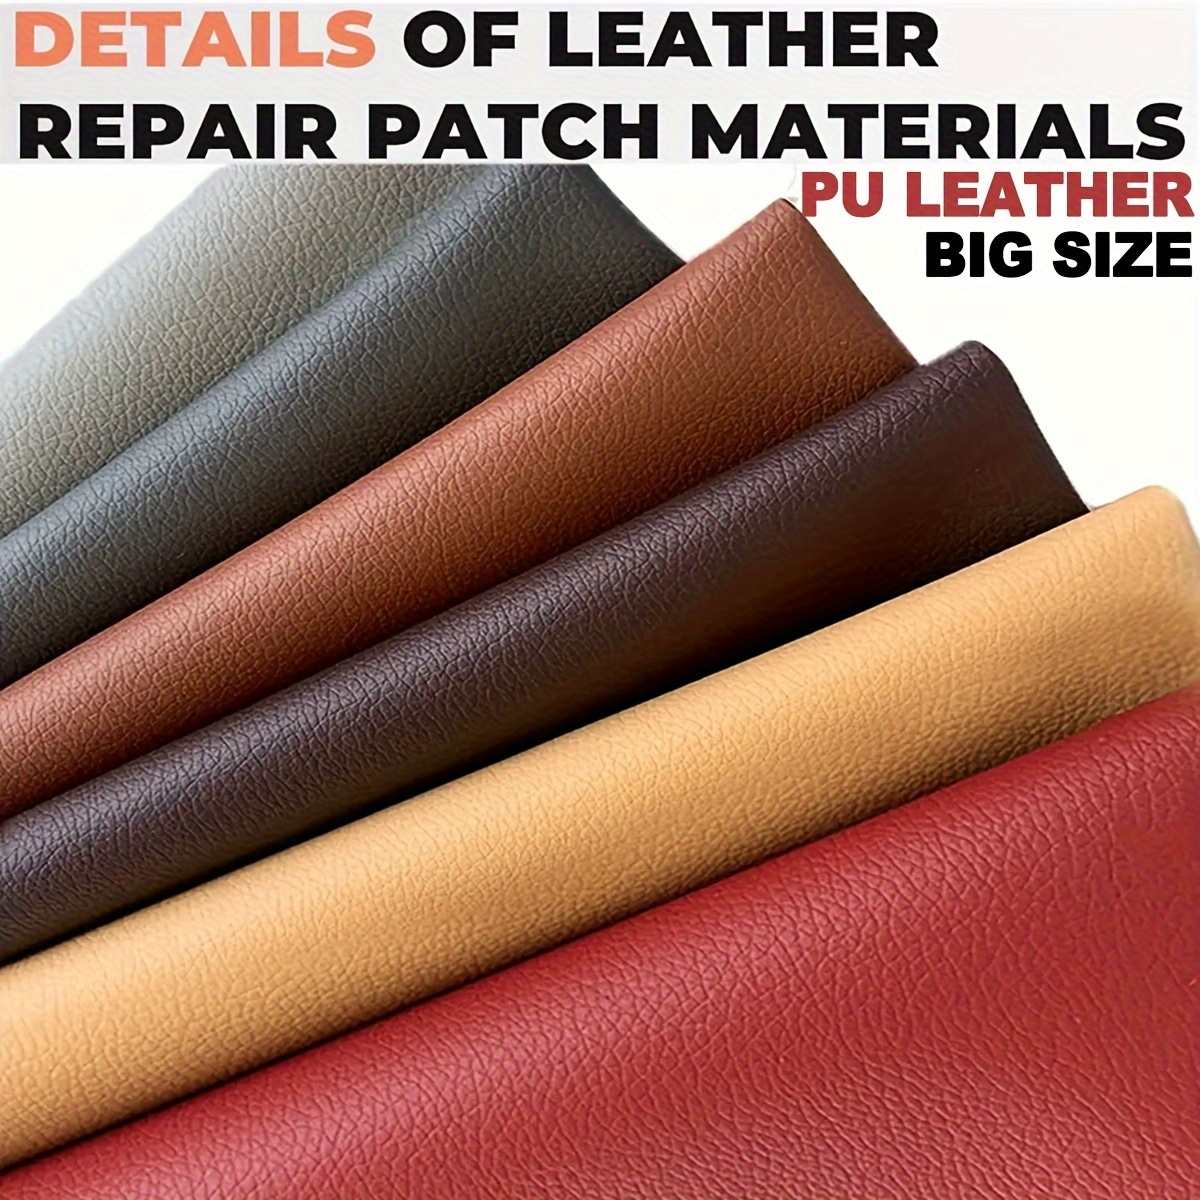 Leather Repair Patch Tape, Self Adhesive 50 x 135 cm Leather Patches for  Couch Leather Sticker, for Sofa Car Seats Furniture